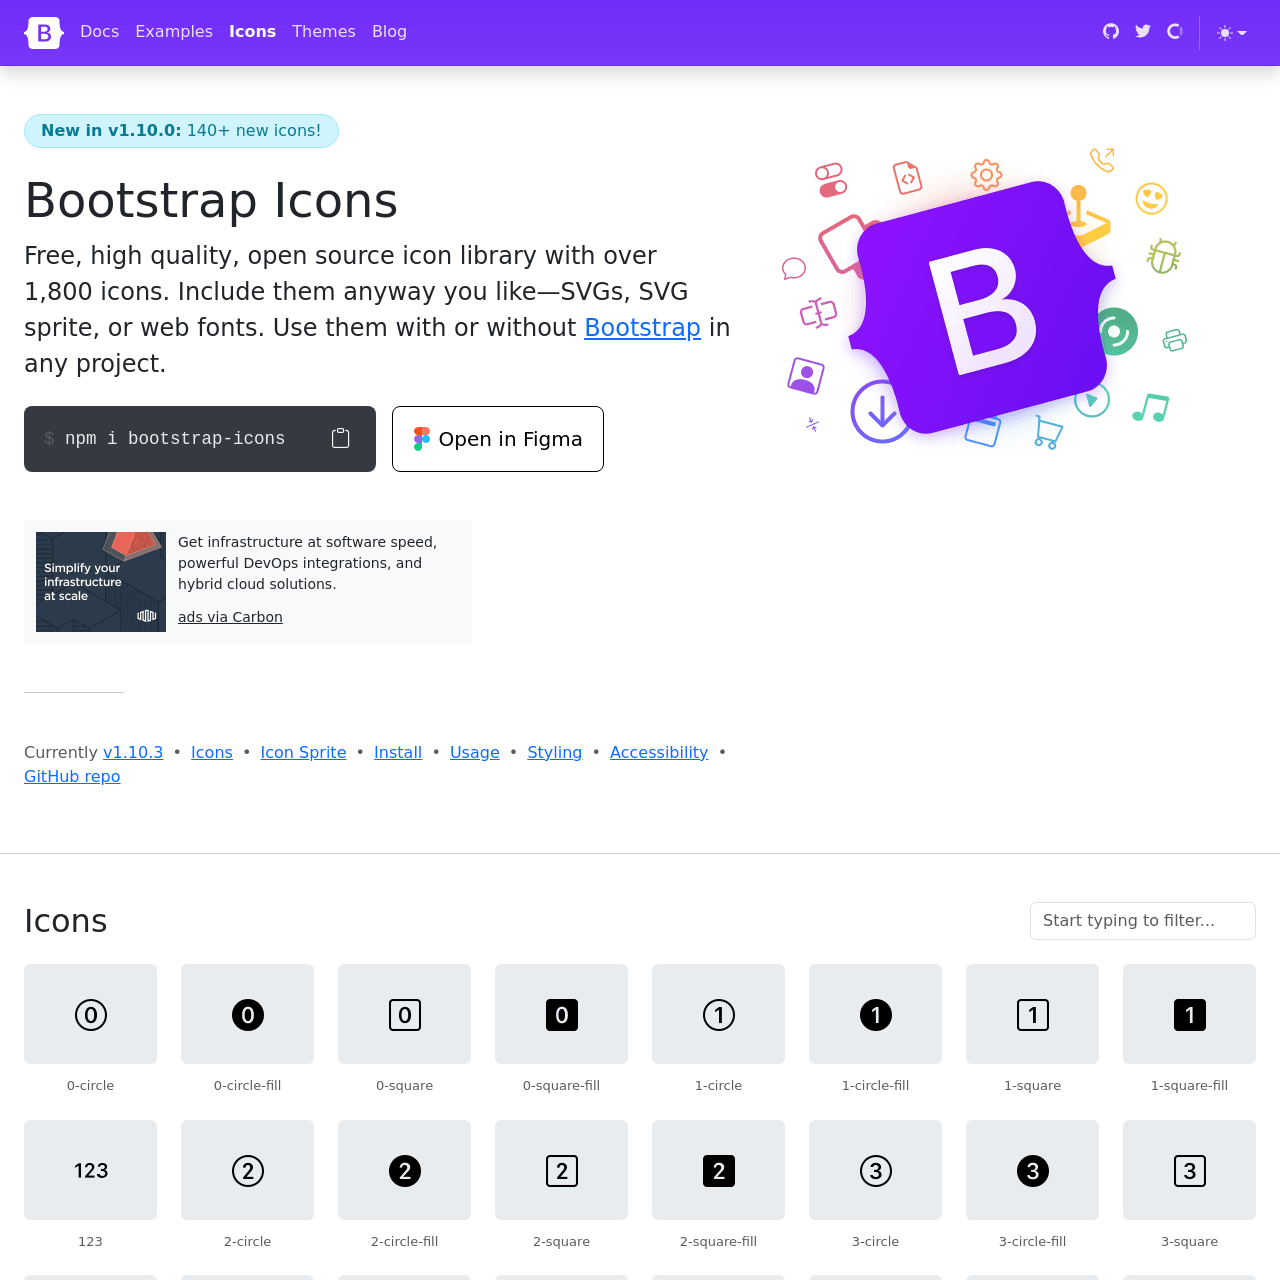 Screenshot of Bootstrap Icons website